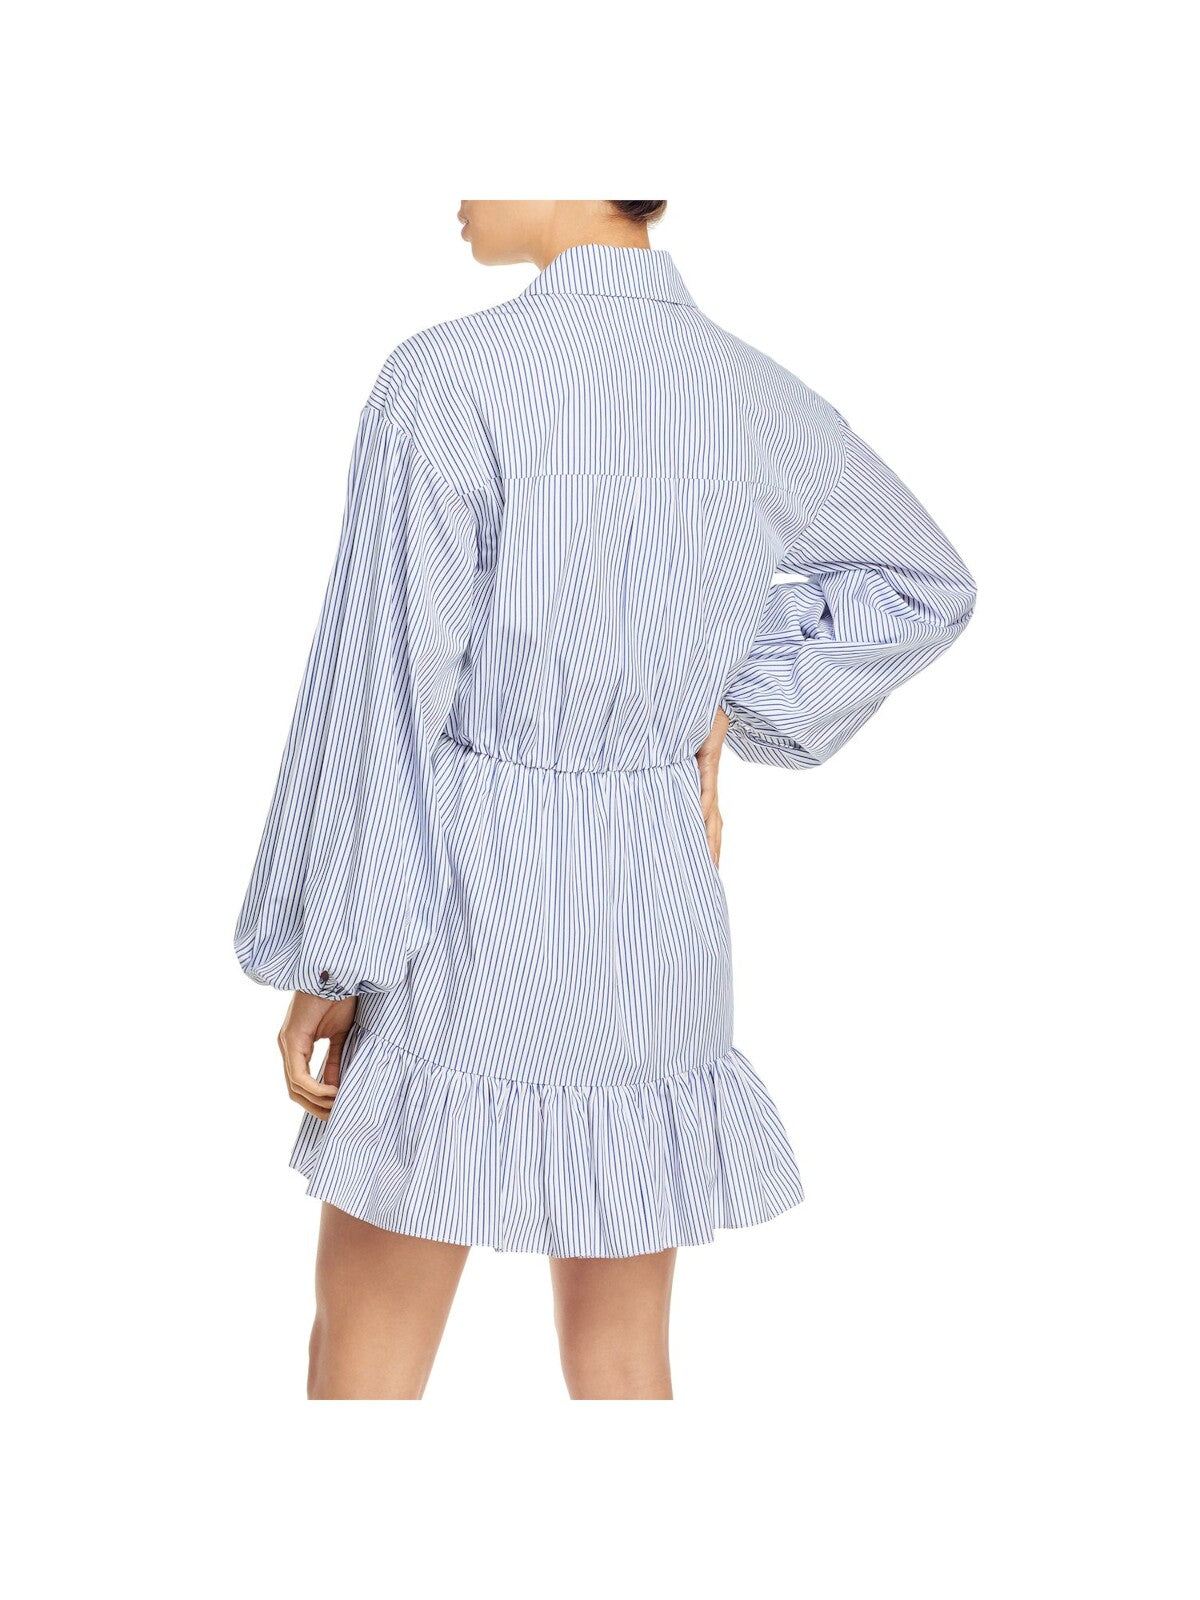 CINQ A SEPT Womens White Belted Ruffled Button Front Striped Balloon Sleeve Collared Short Party Shirt Dress 10